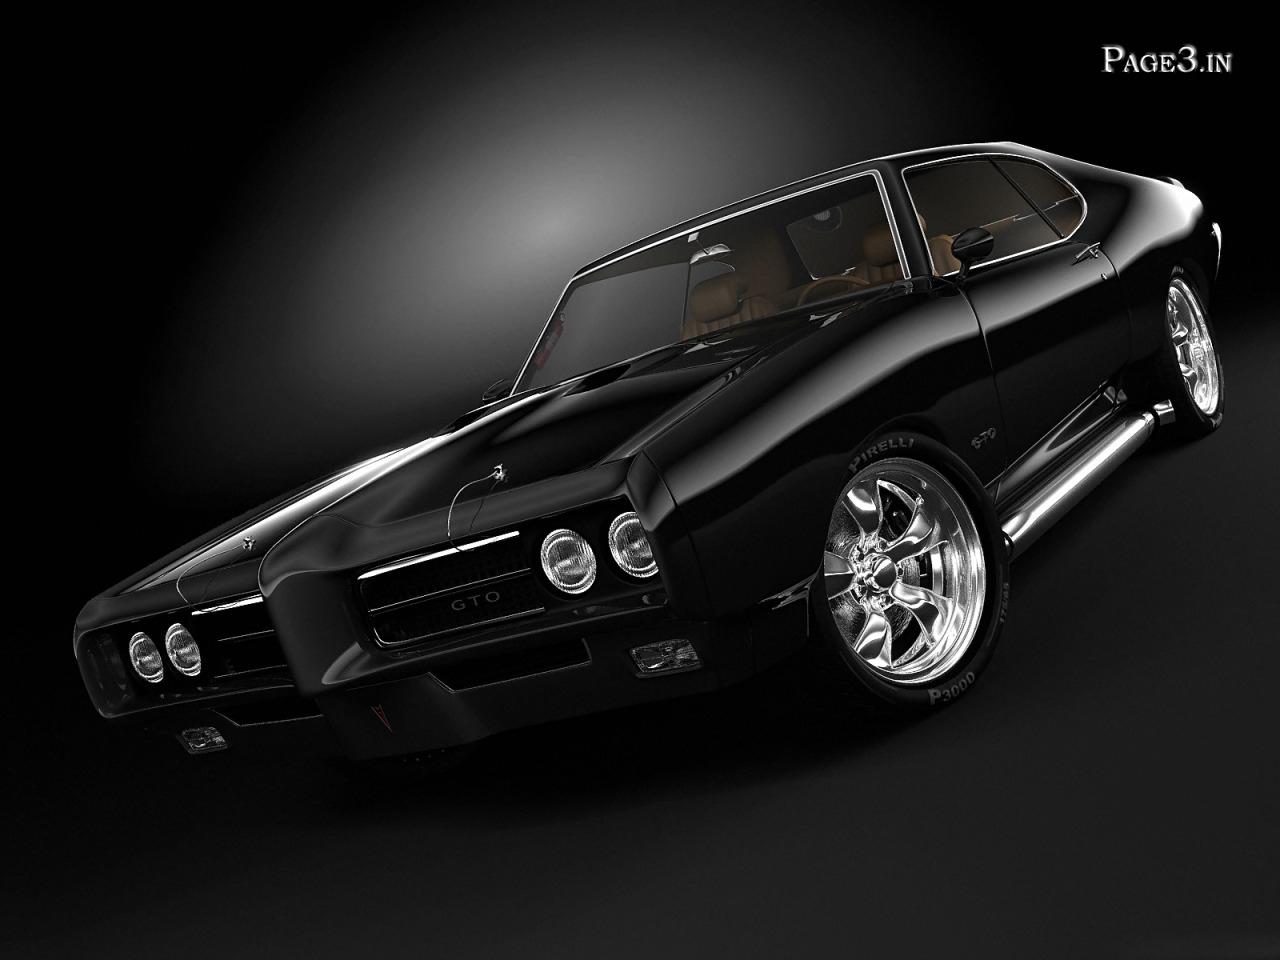 THE BEST NEW WALLPAPER COLLECTION free muscle car wallpapers